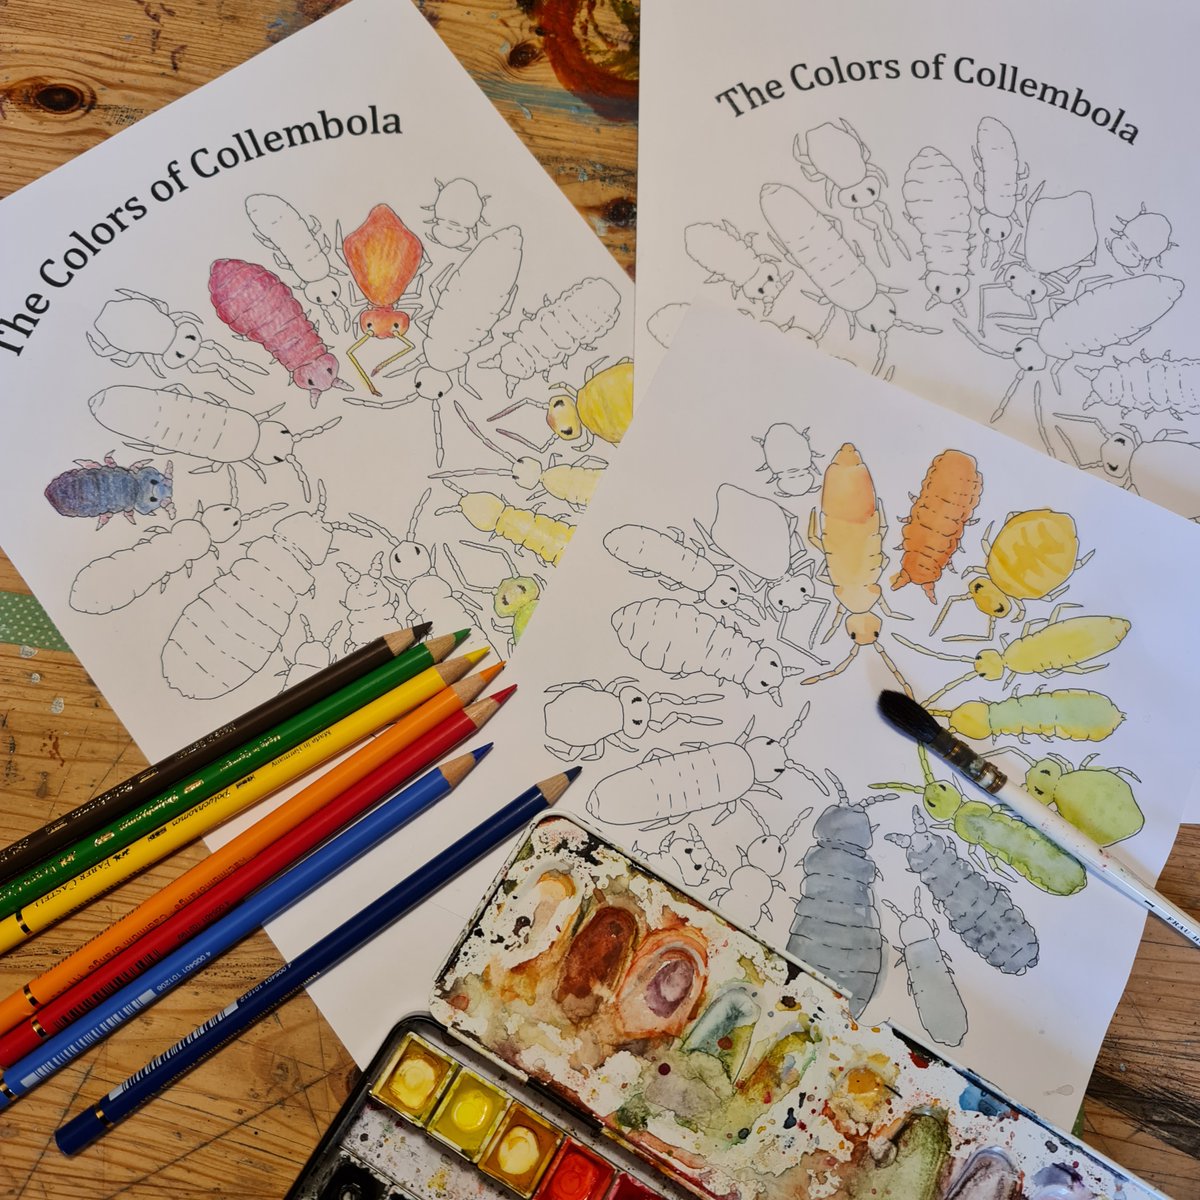 I added this Collembola coloring page to my shop (as a digital file). For a symbolic prize of 1€. May be of use for some outreach activities or just for your own meditative Collembola session.  

smartwork.bigcartel.com/product/collem…